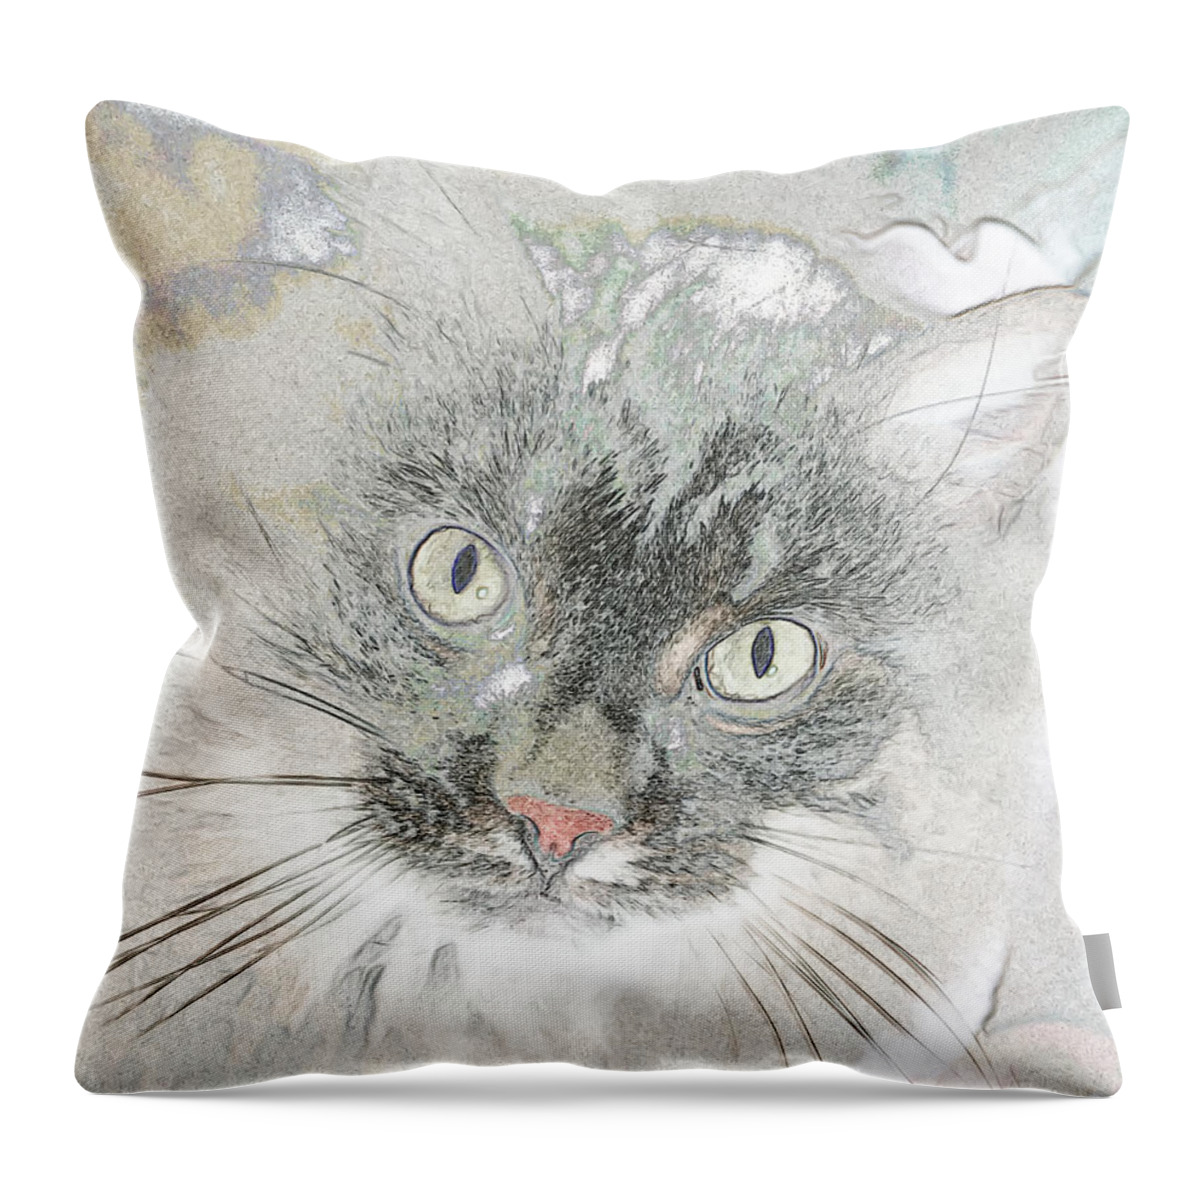 Photograph Throw Pillow featuring the photograph Cattitude by Rhonda McDougall